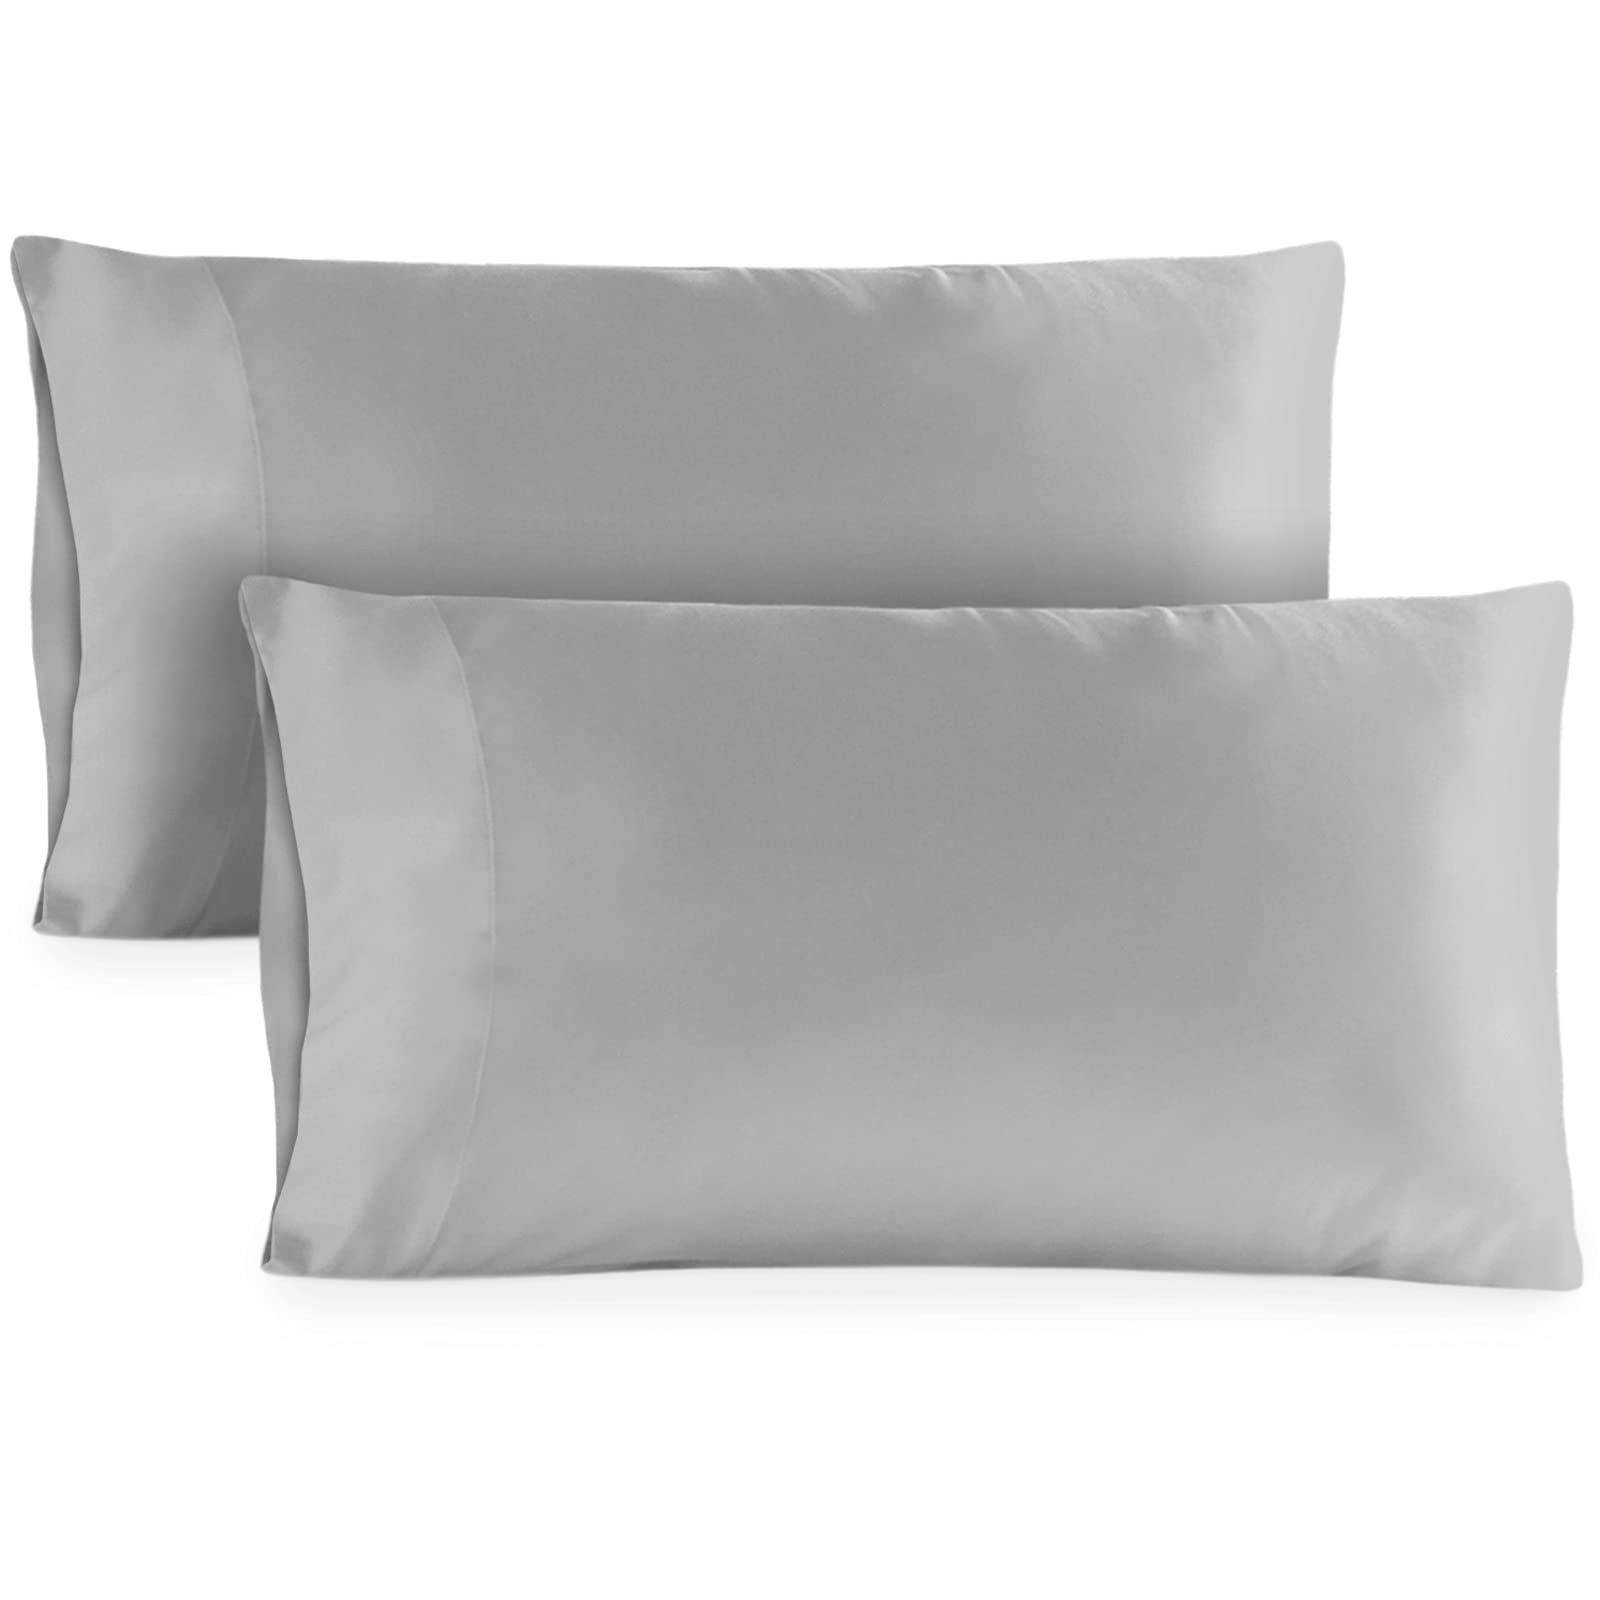 Book Cover Hotel Sheets Direct Pillow Cases Standard Size (Queen) - Set of 2, 20x30 Inch Cooling Pillow Cases Queen - Silky Pillowcase for Hair and Skin - Grey 2 Standard/Queen Pillowcases Grey